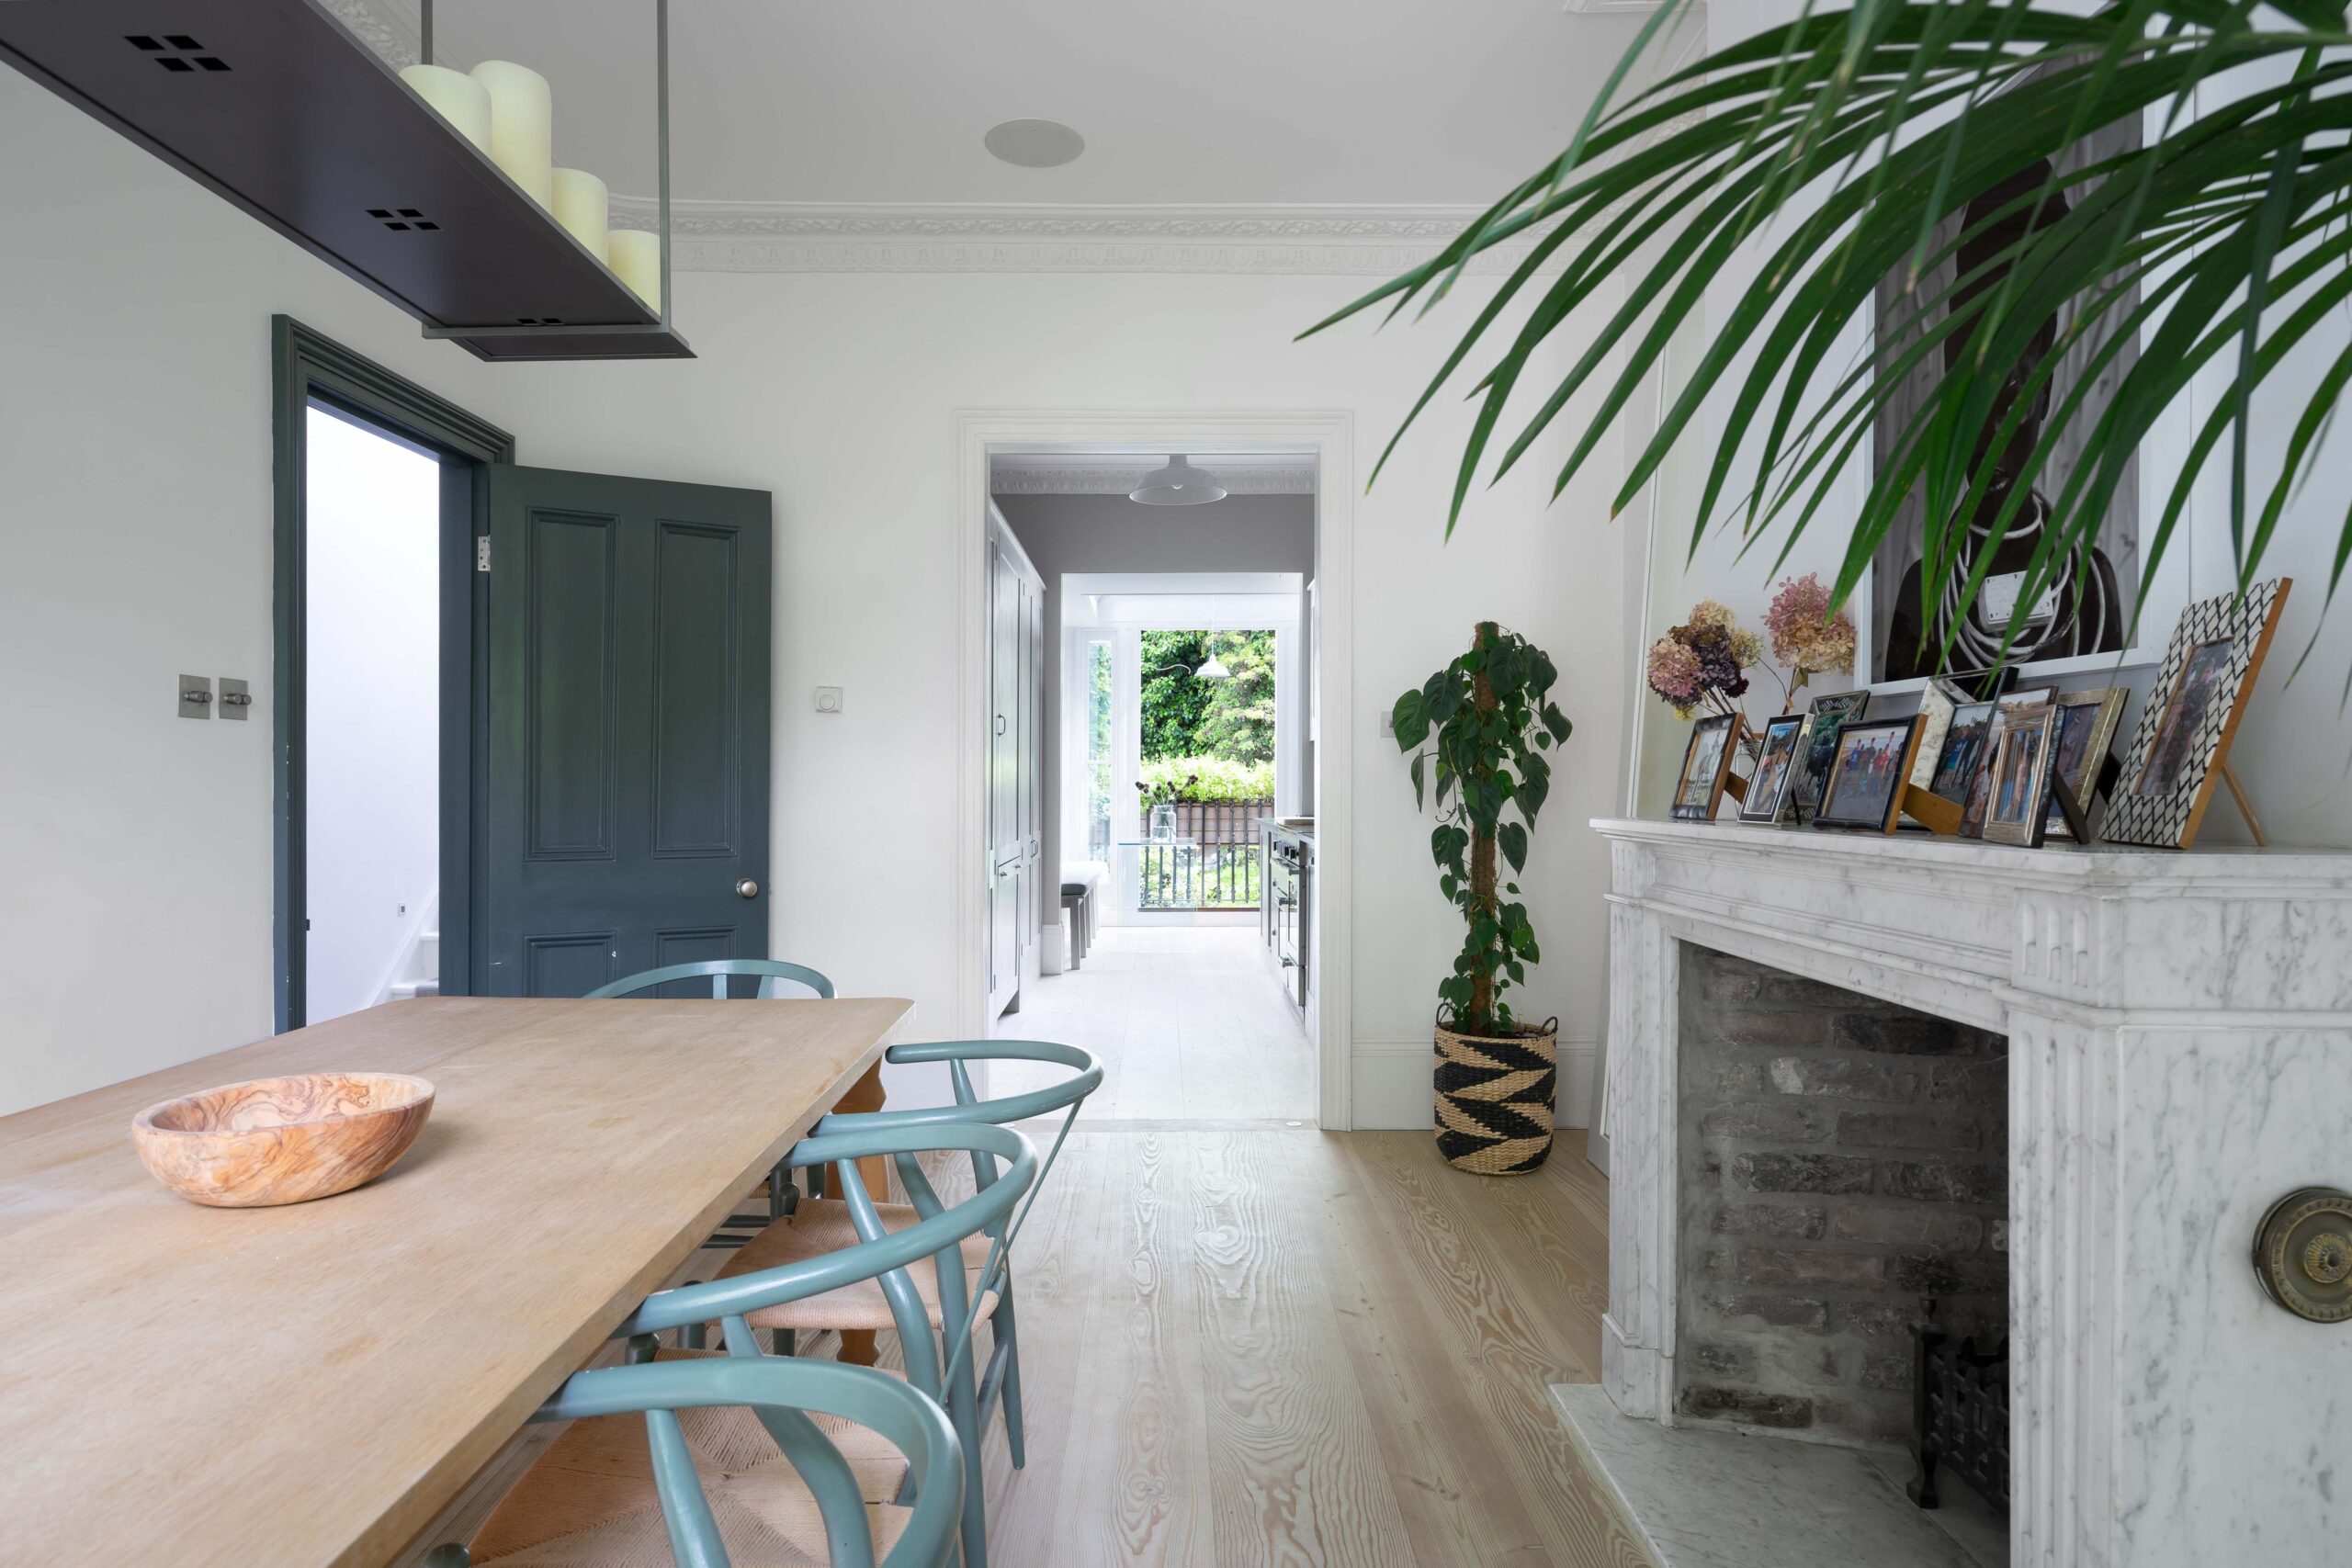 For Sale: Kensington Park Road Notting Hill W11 contemporary interior design in dining room